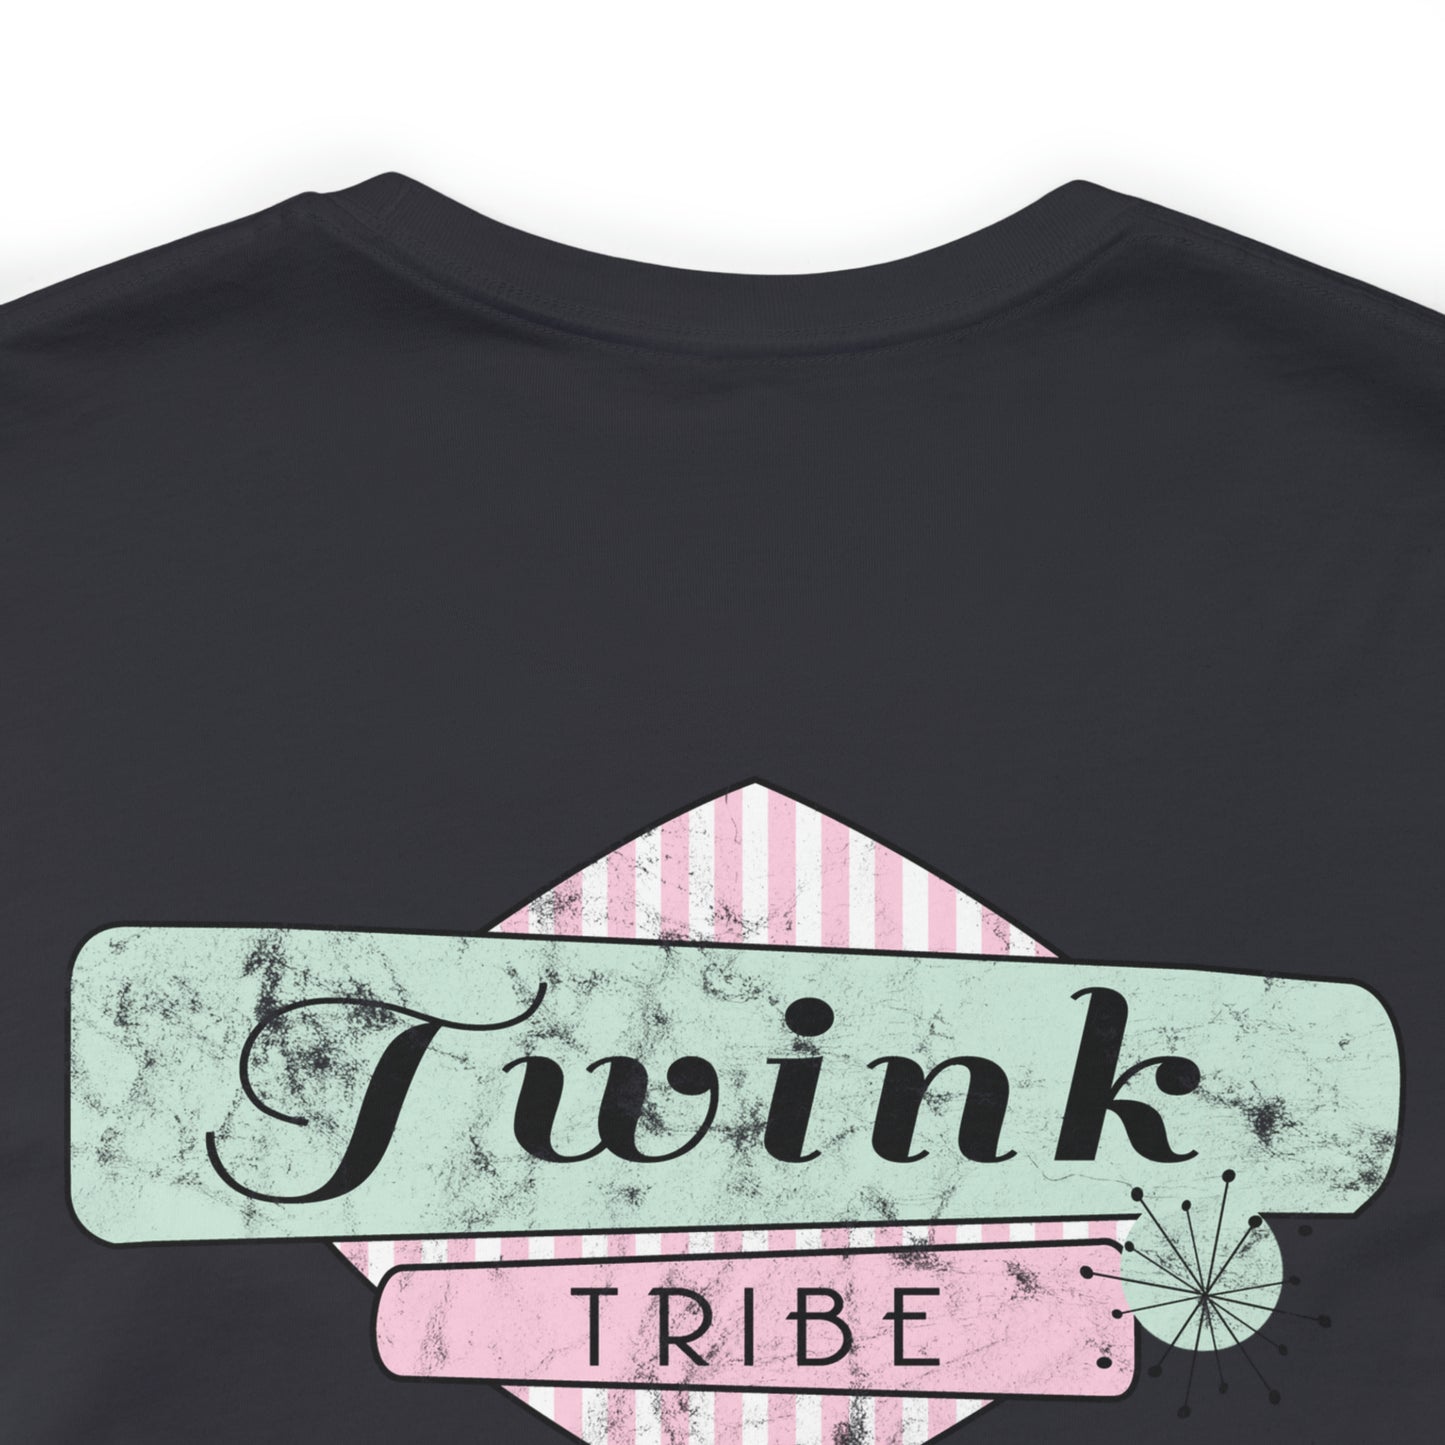 My Twink 50s Diner T-Shirt